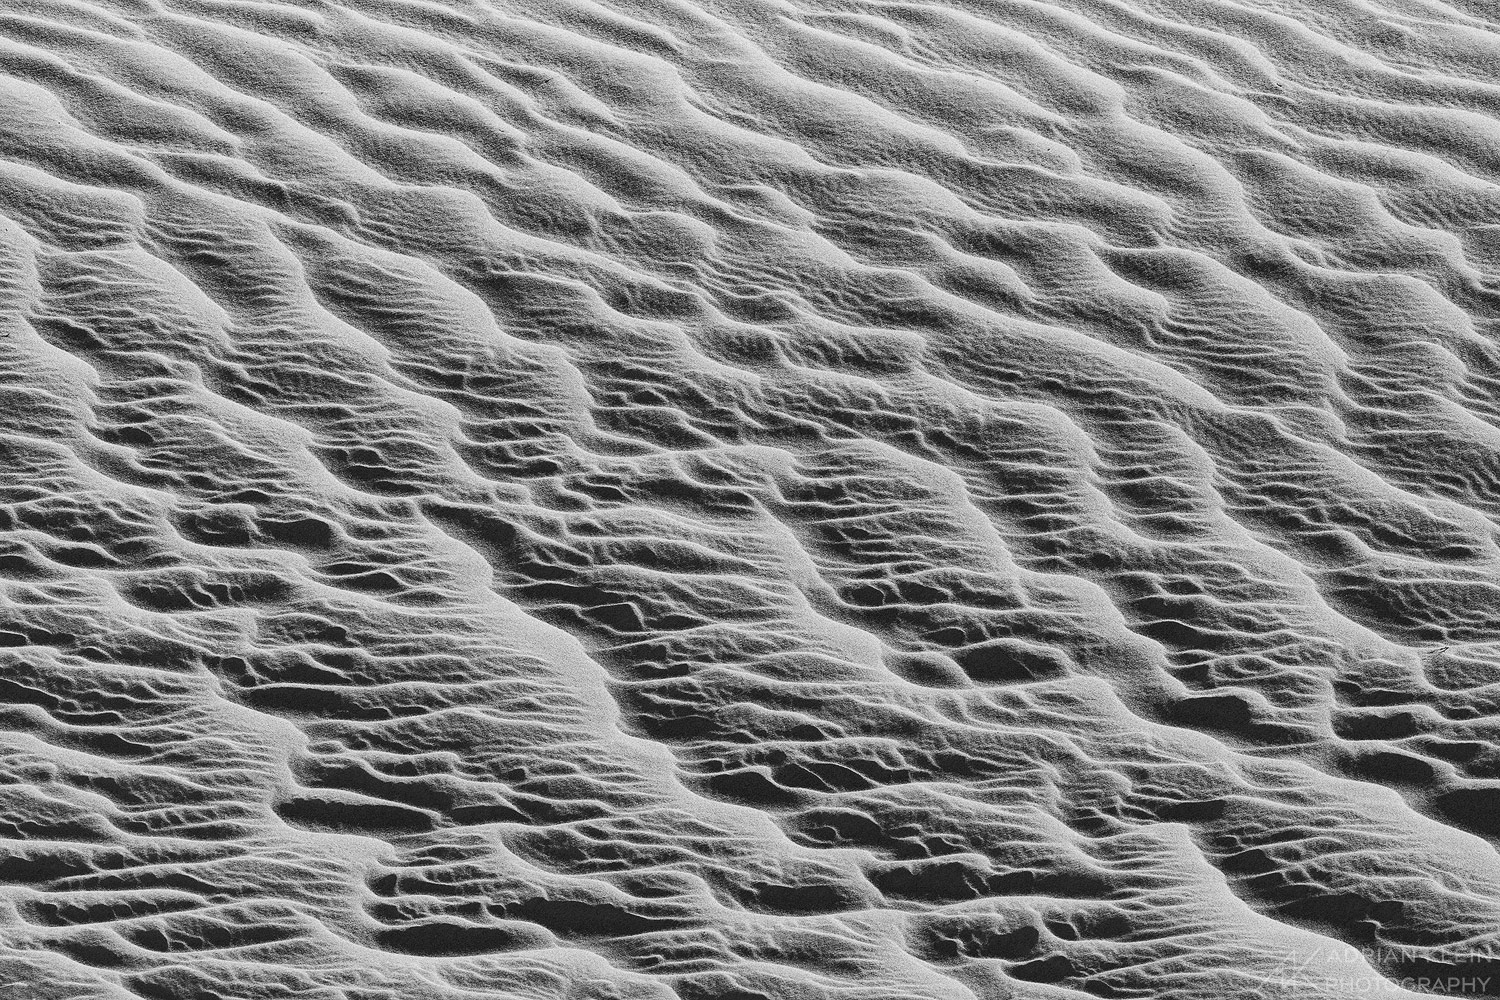 Abstract view of sand sculpted by the wind in Death Valley National Park, California